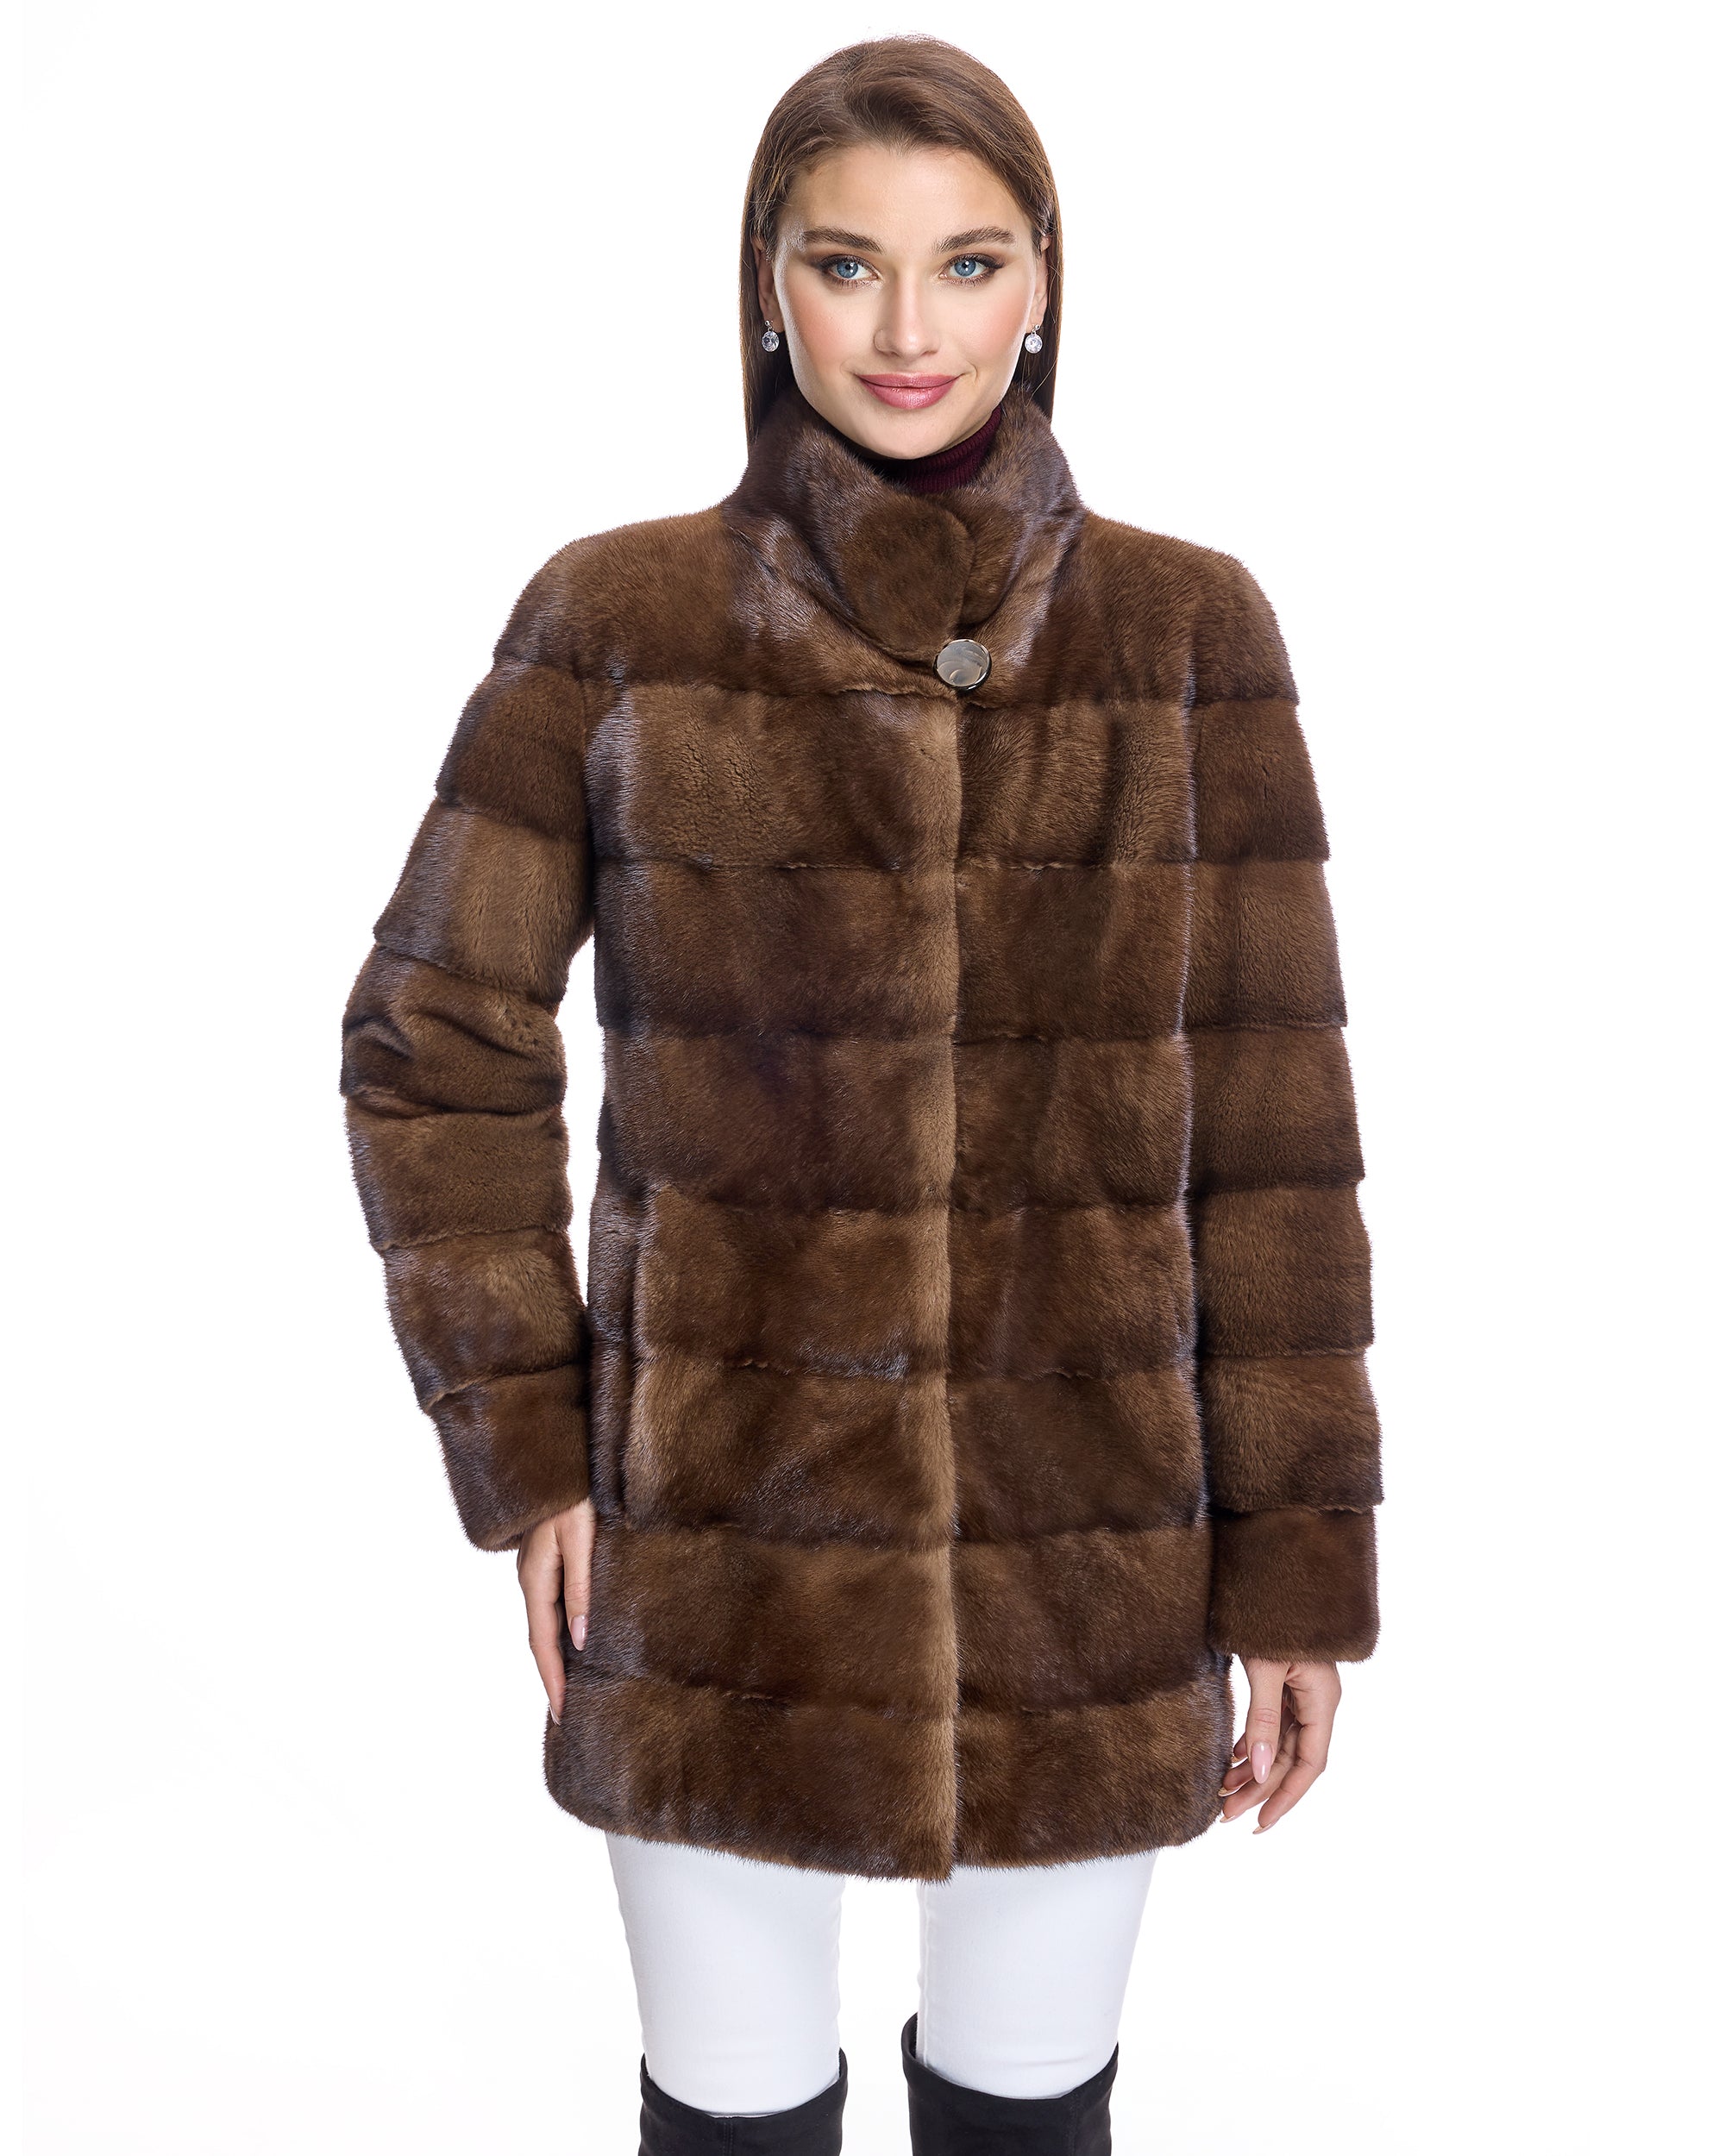 Blackglama Mink Coat with chanel collar